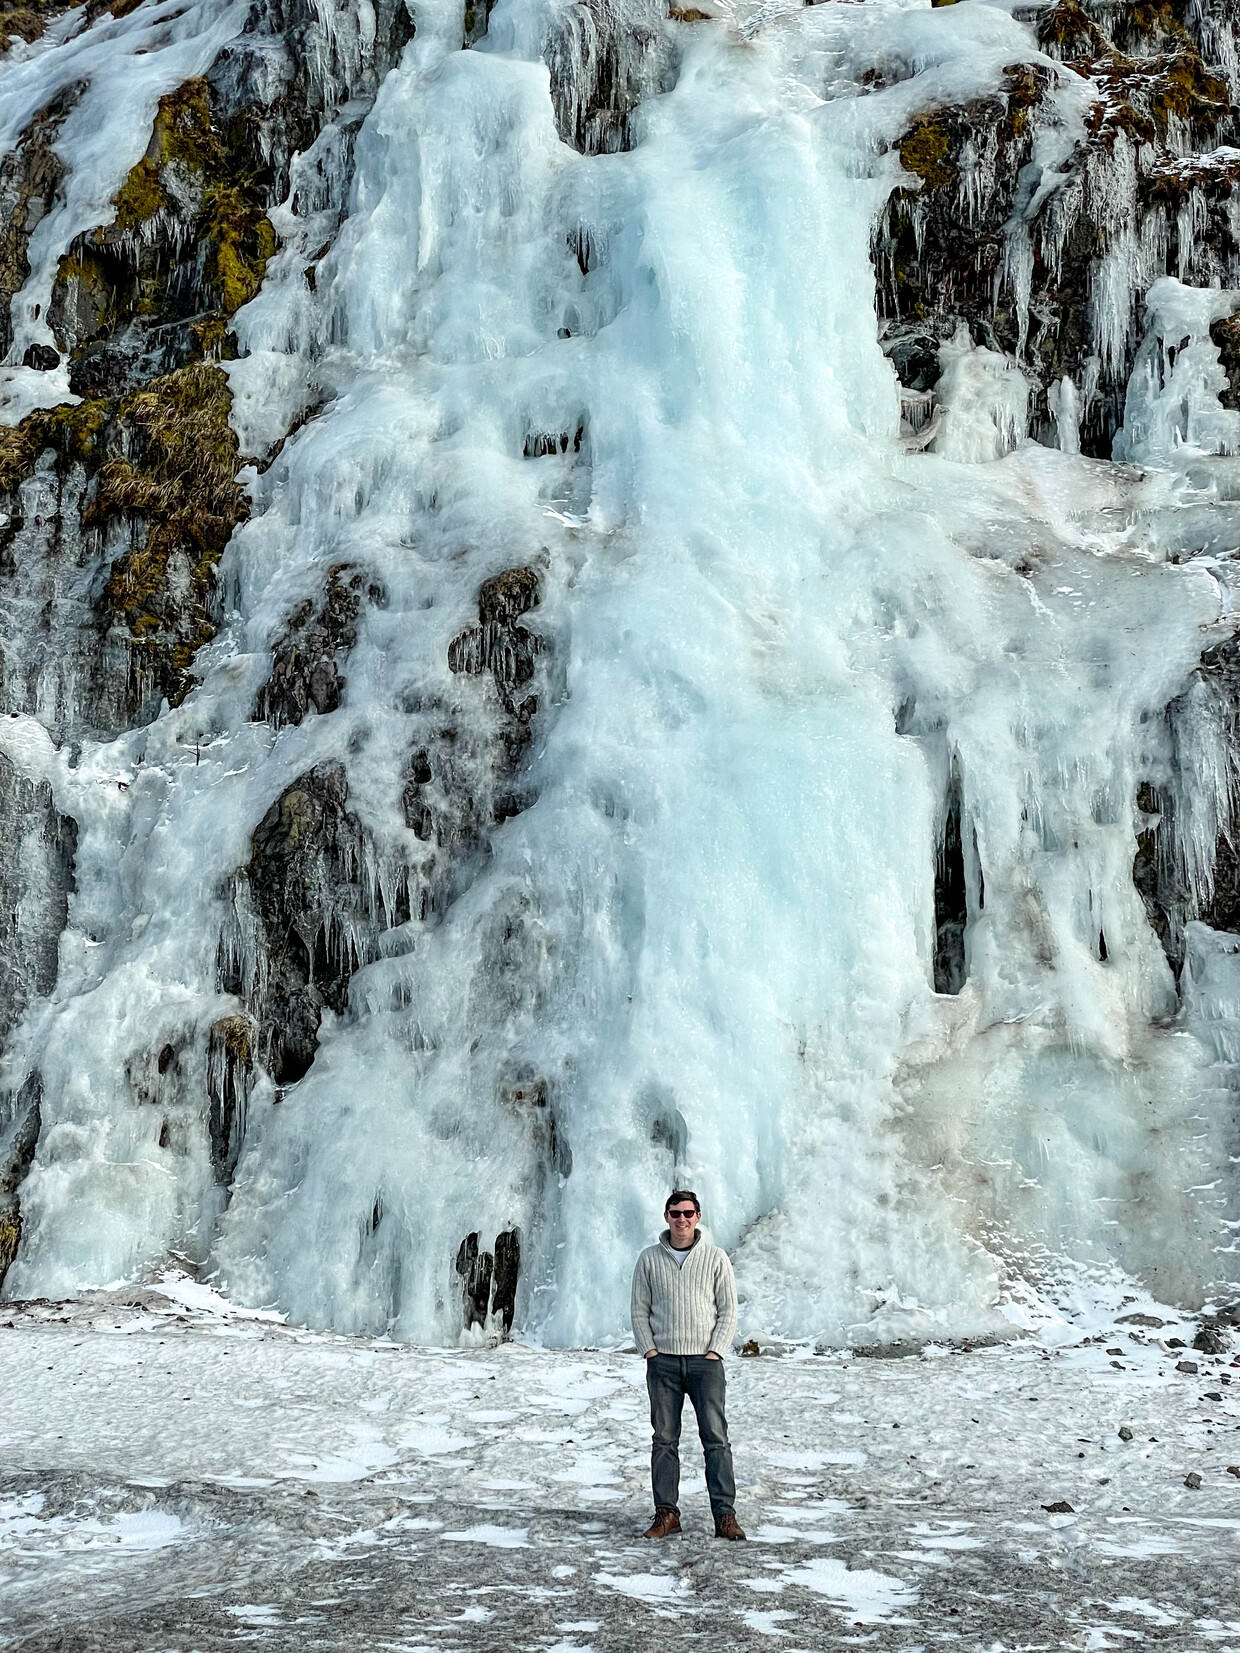 Paul and a frozen waterfall